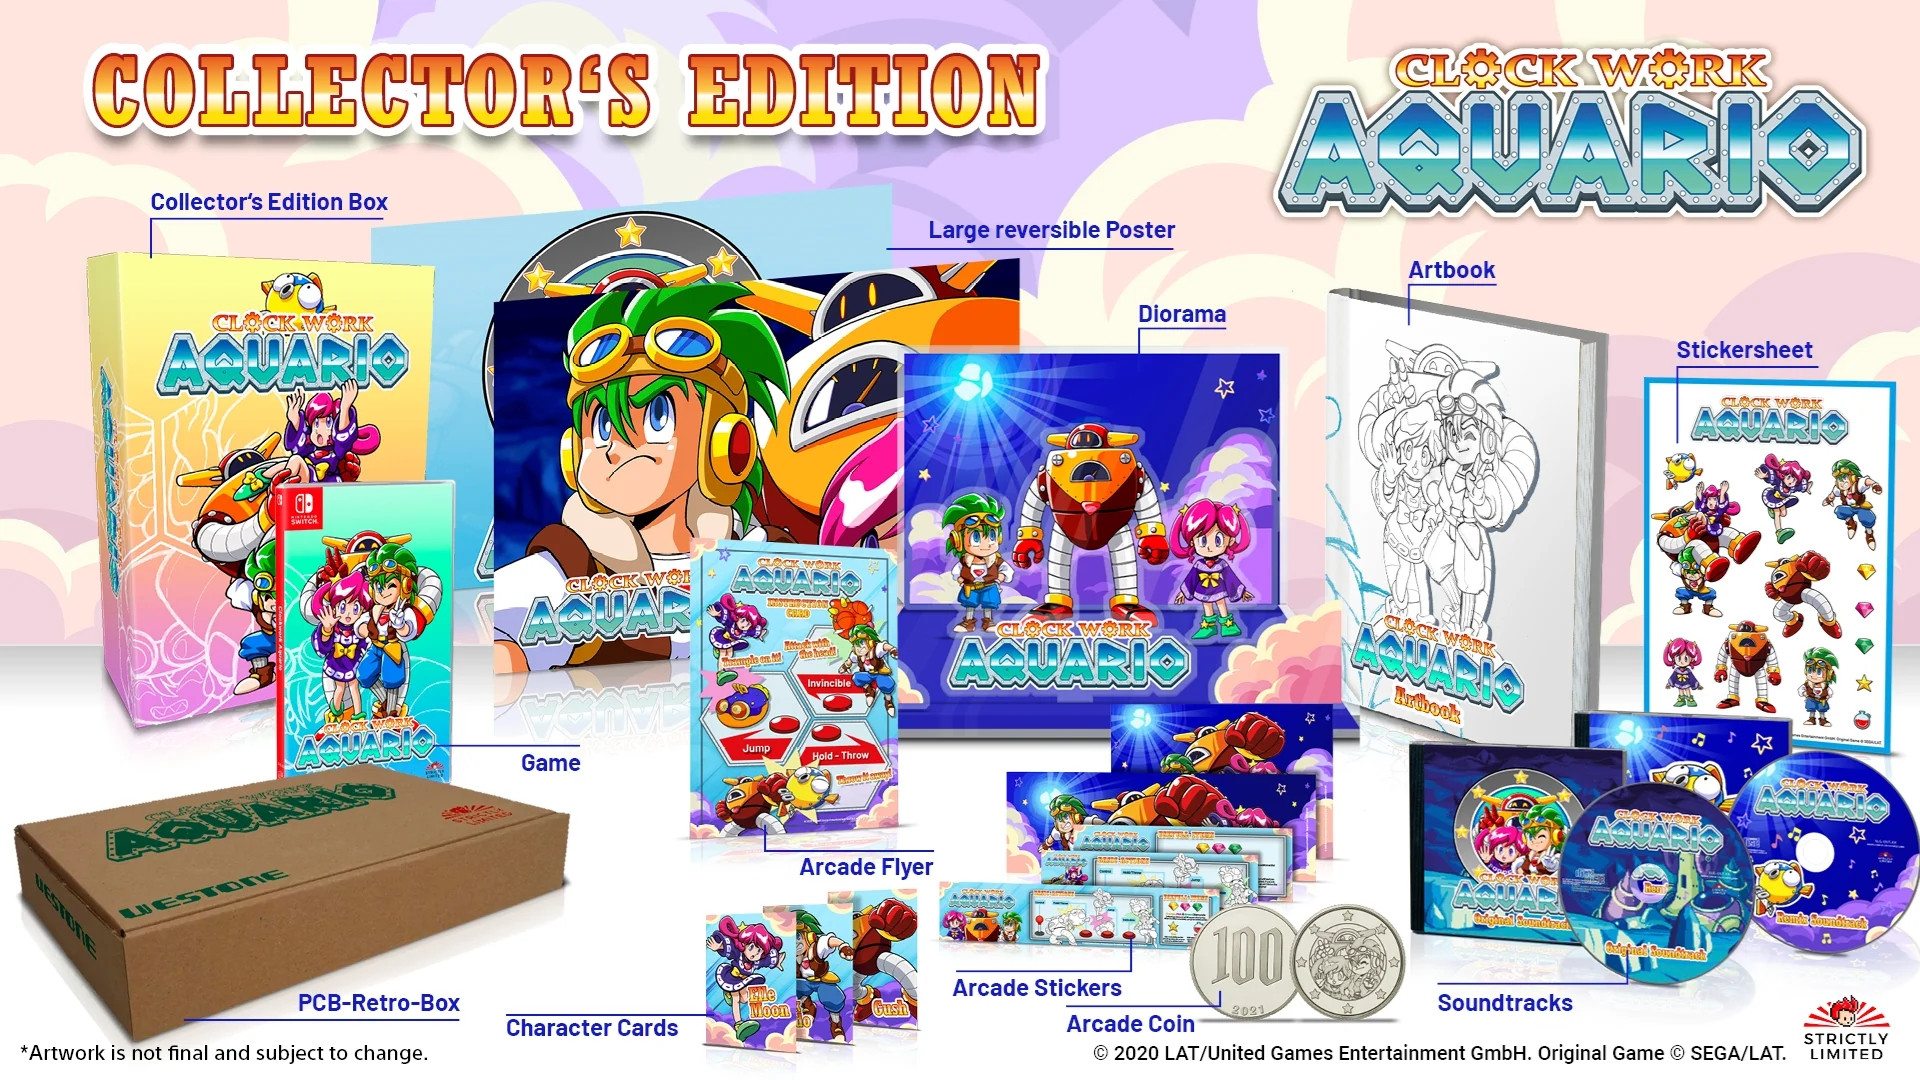 Clockwork Aquario - Collector's Edition (Strictly Limited) (Switch), Strictly Limited Games